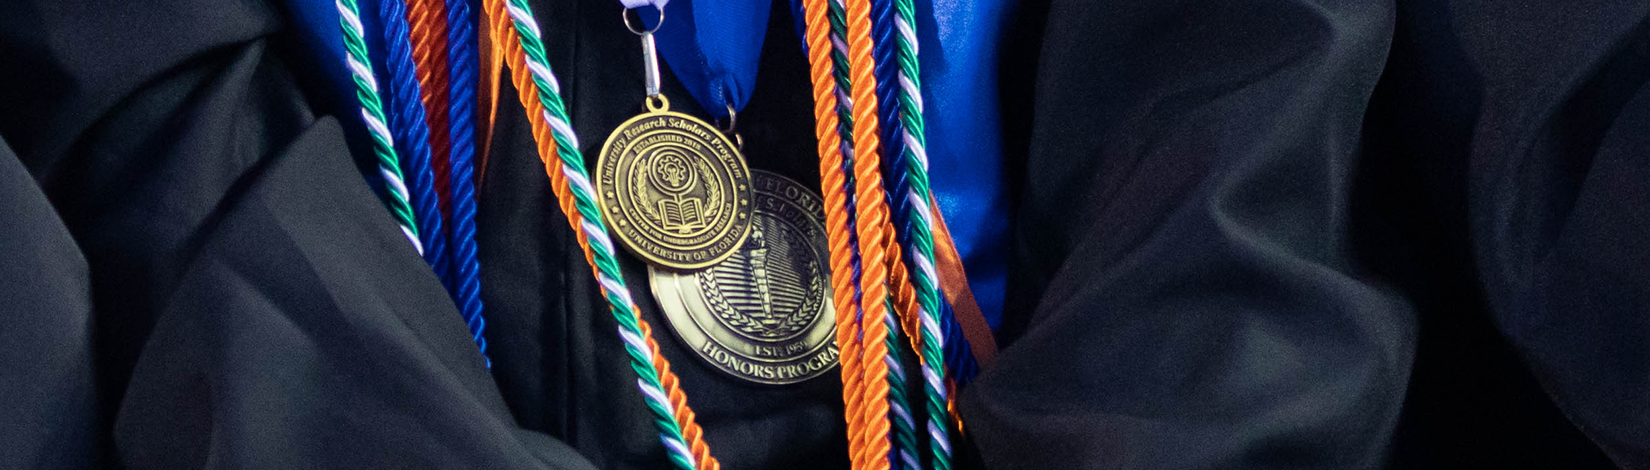 Cords and Medallions hang around graduating students robe. One Medallion reads Honors Program and the other reads University Research Scholars Program.  